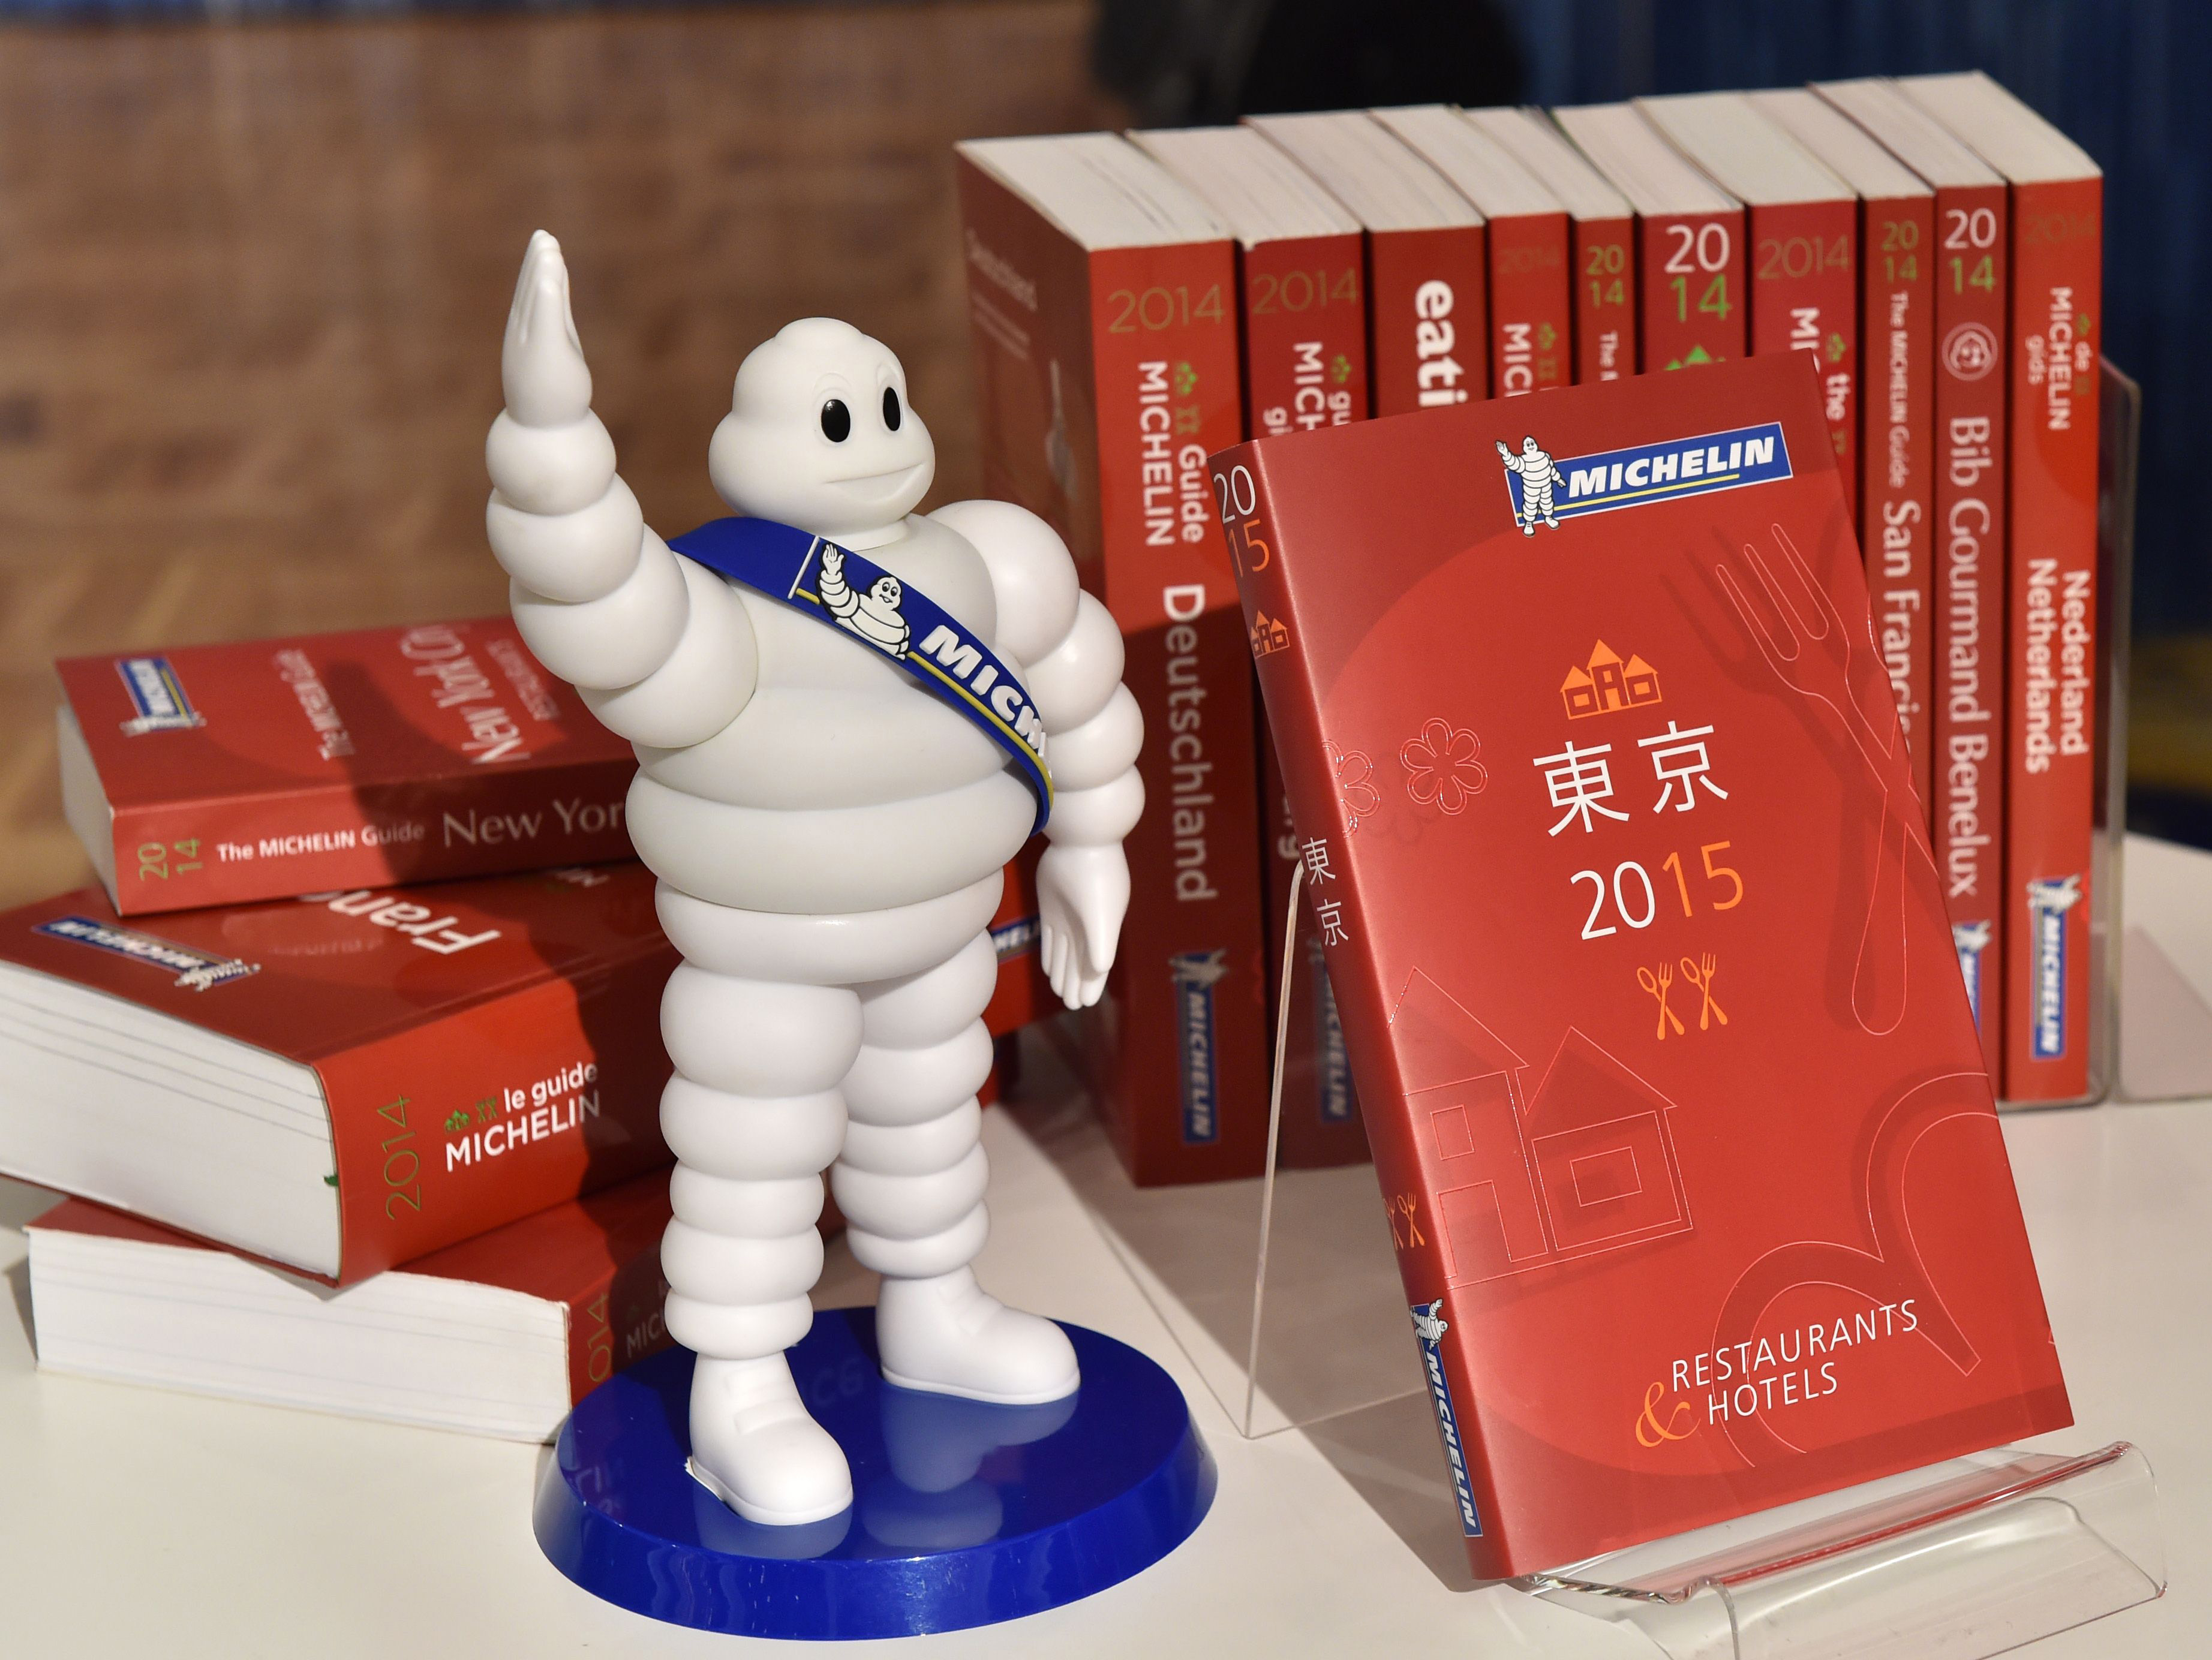 The Michelin Guide Tokyo 2015 is displayed during its launch in Tokyo on Tuesday. | AFP-JIJI